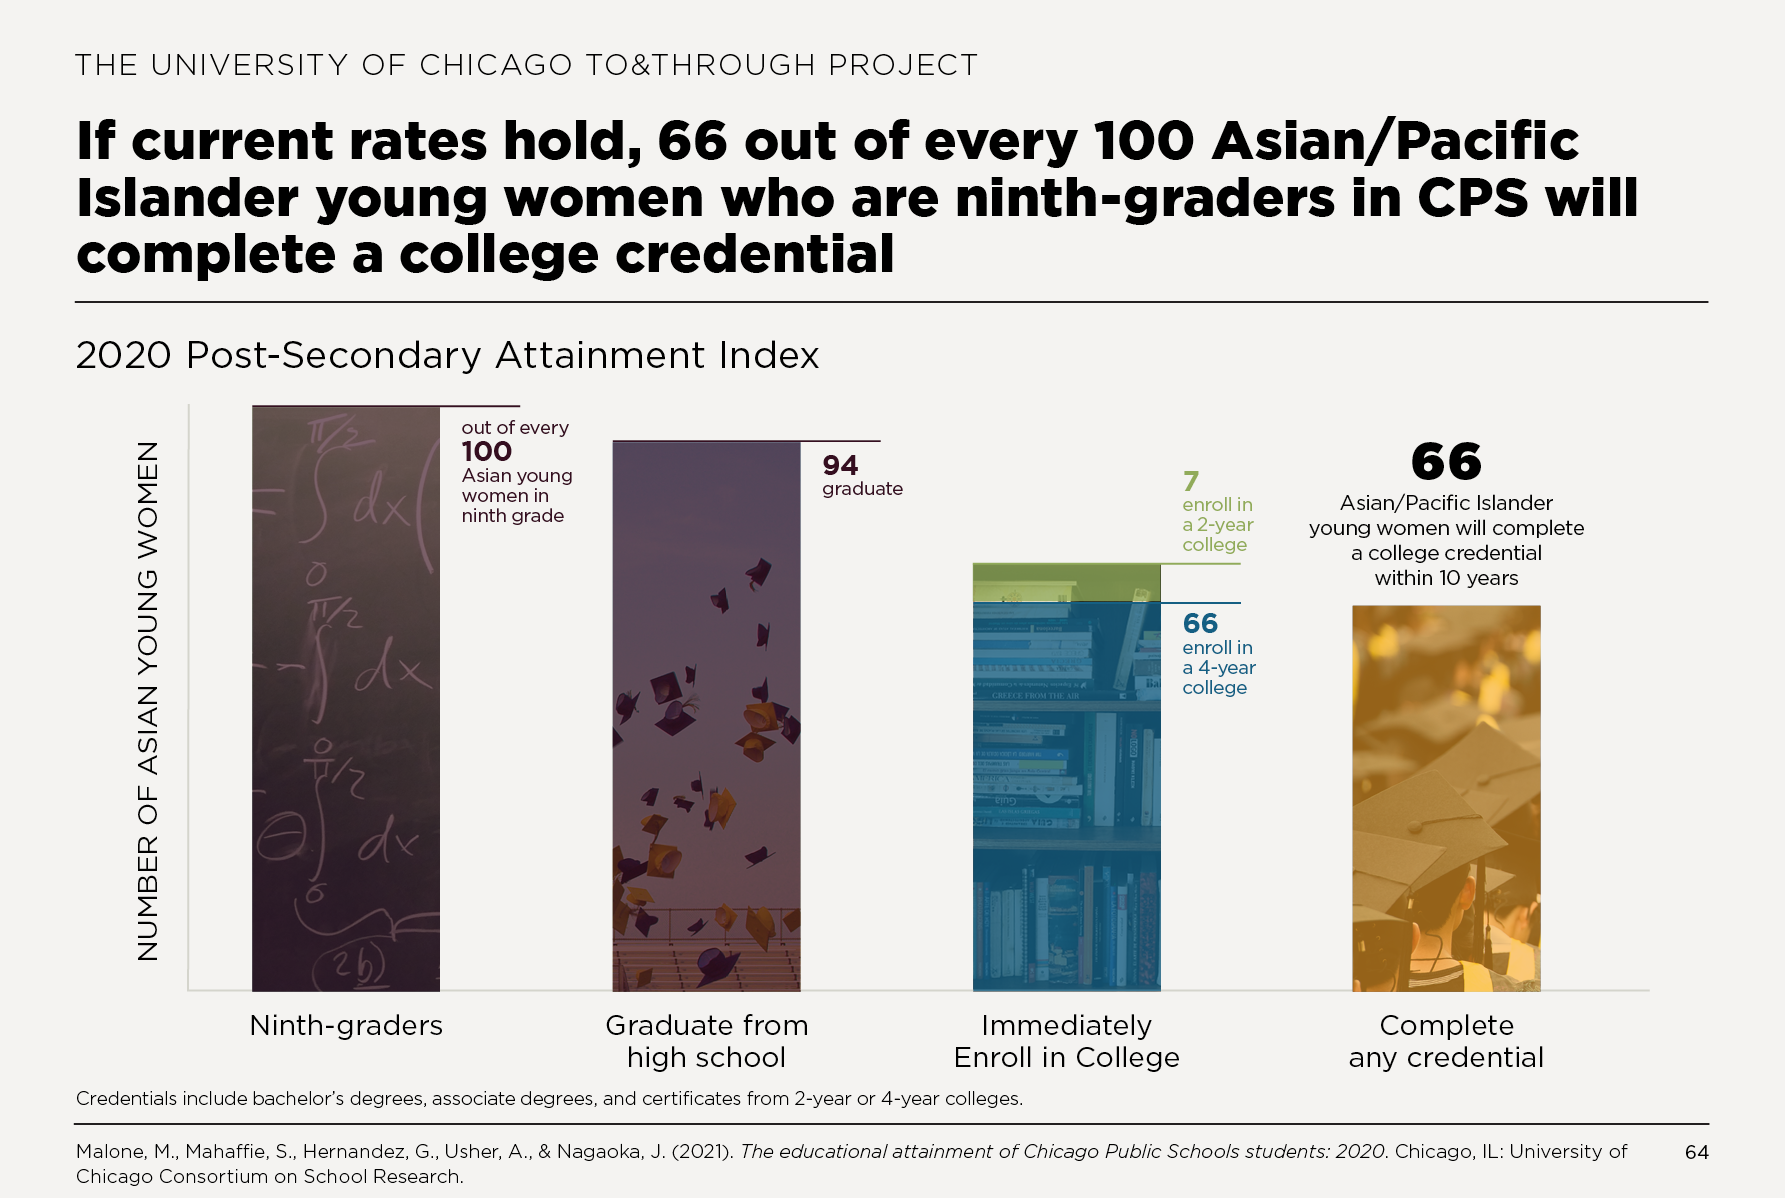 If current rates hold, 66 out of every 100 Asian/Pacific Islander young women who are ninth-graders in CPS will complete a college credential